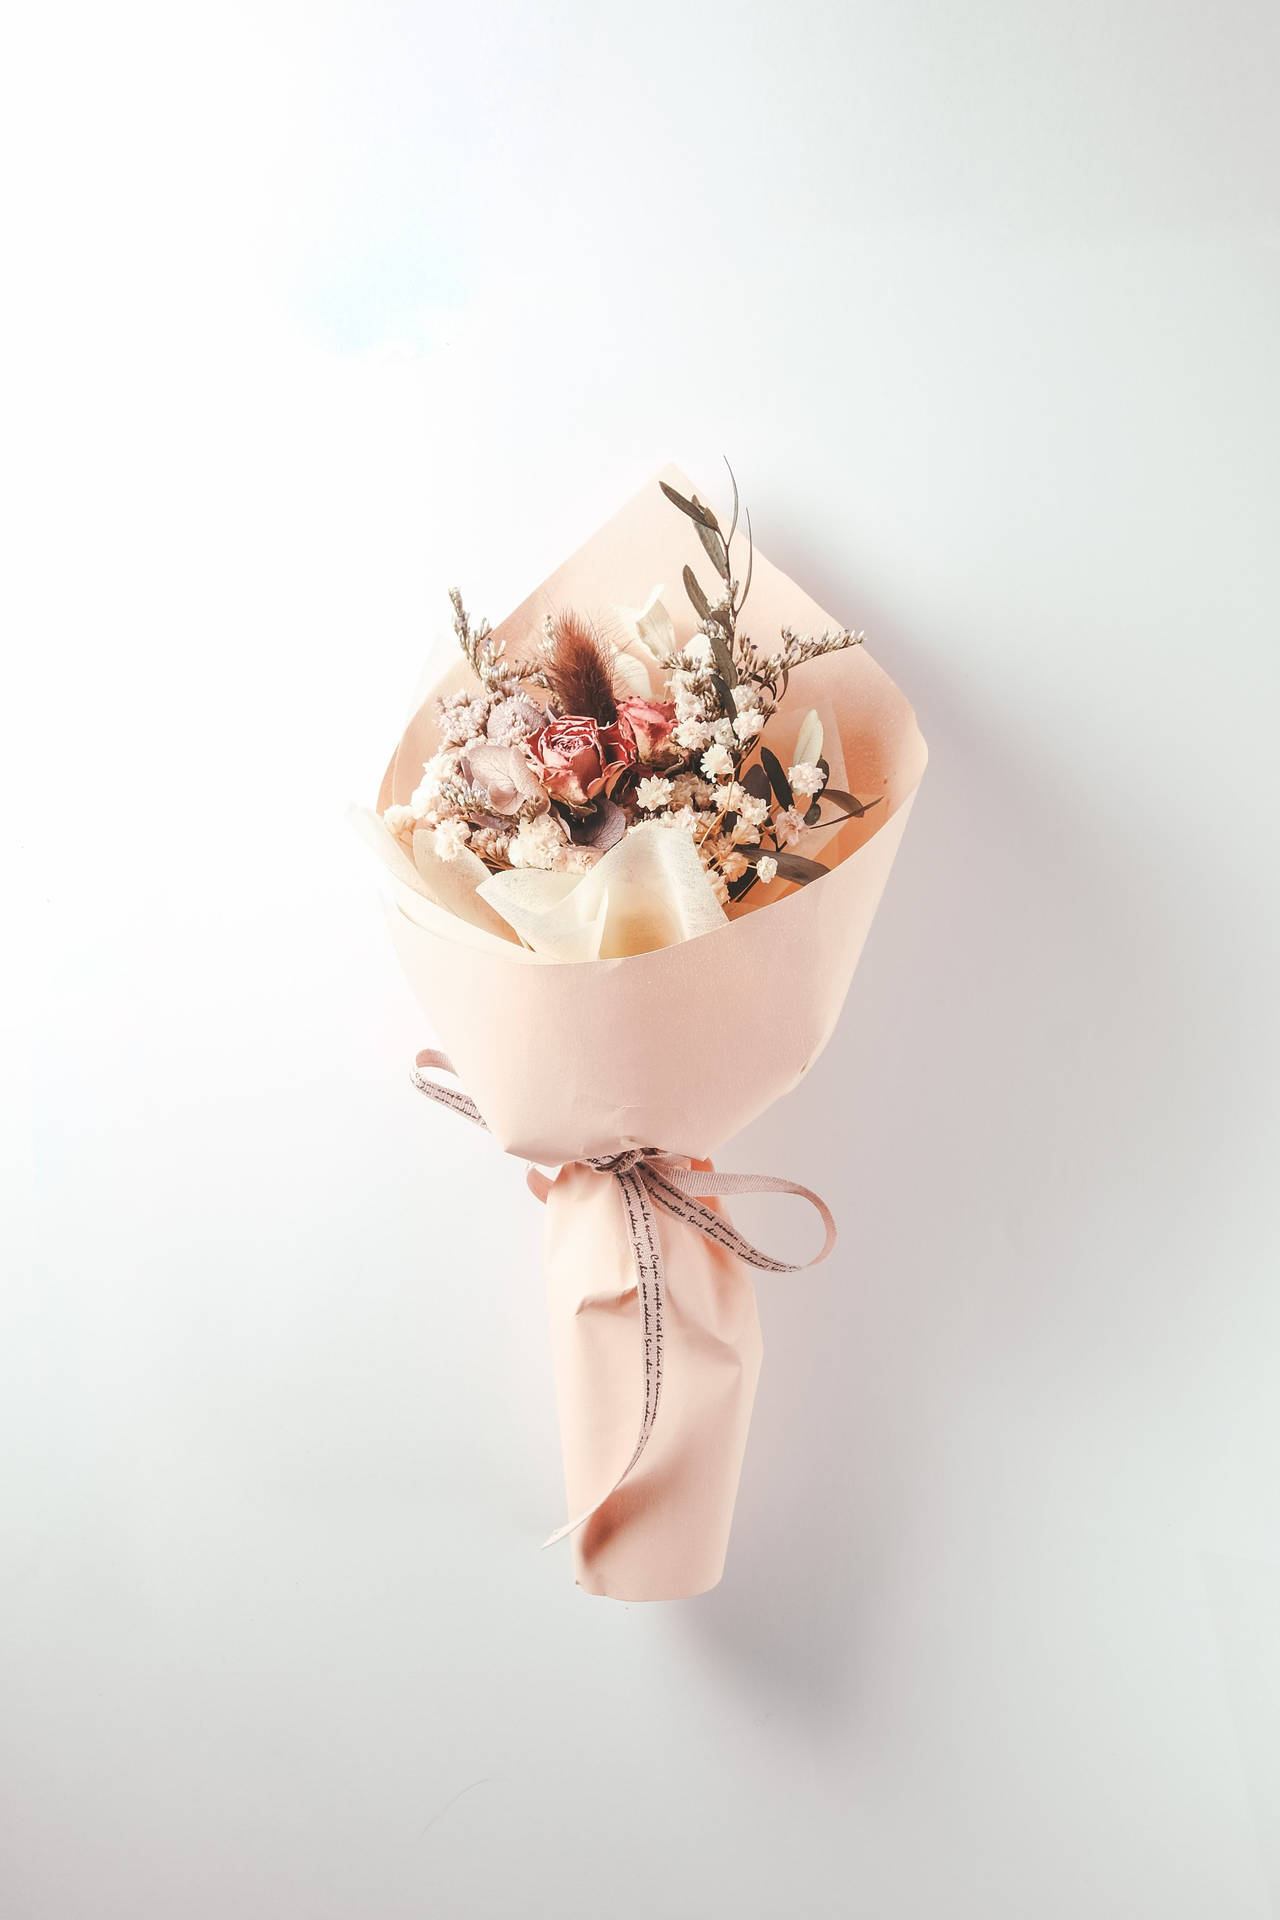 Exquisite Bouquet of Pink Roses and Baby's Breath Wallpaper